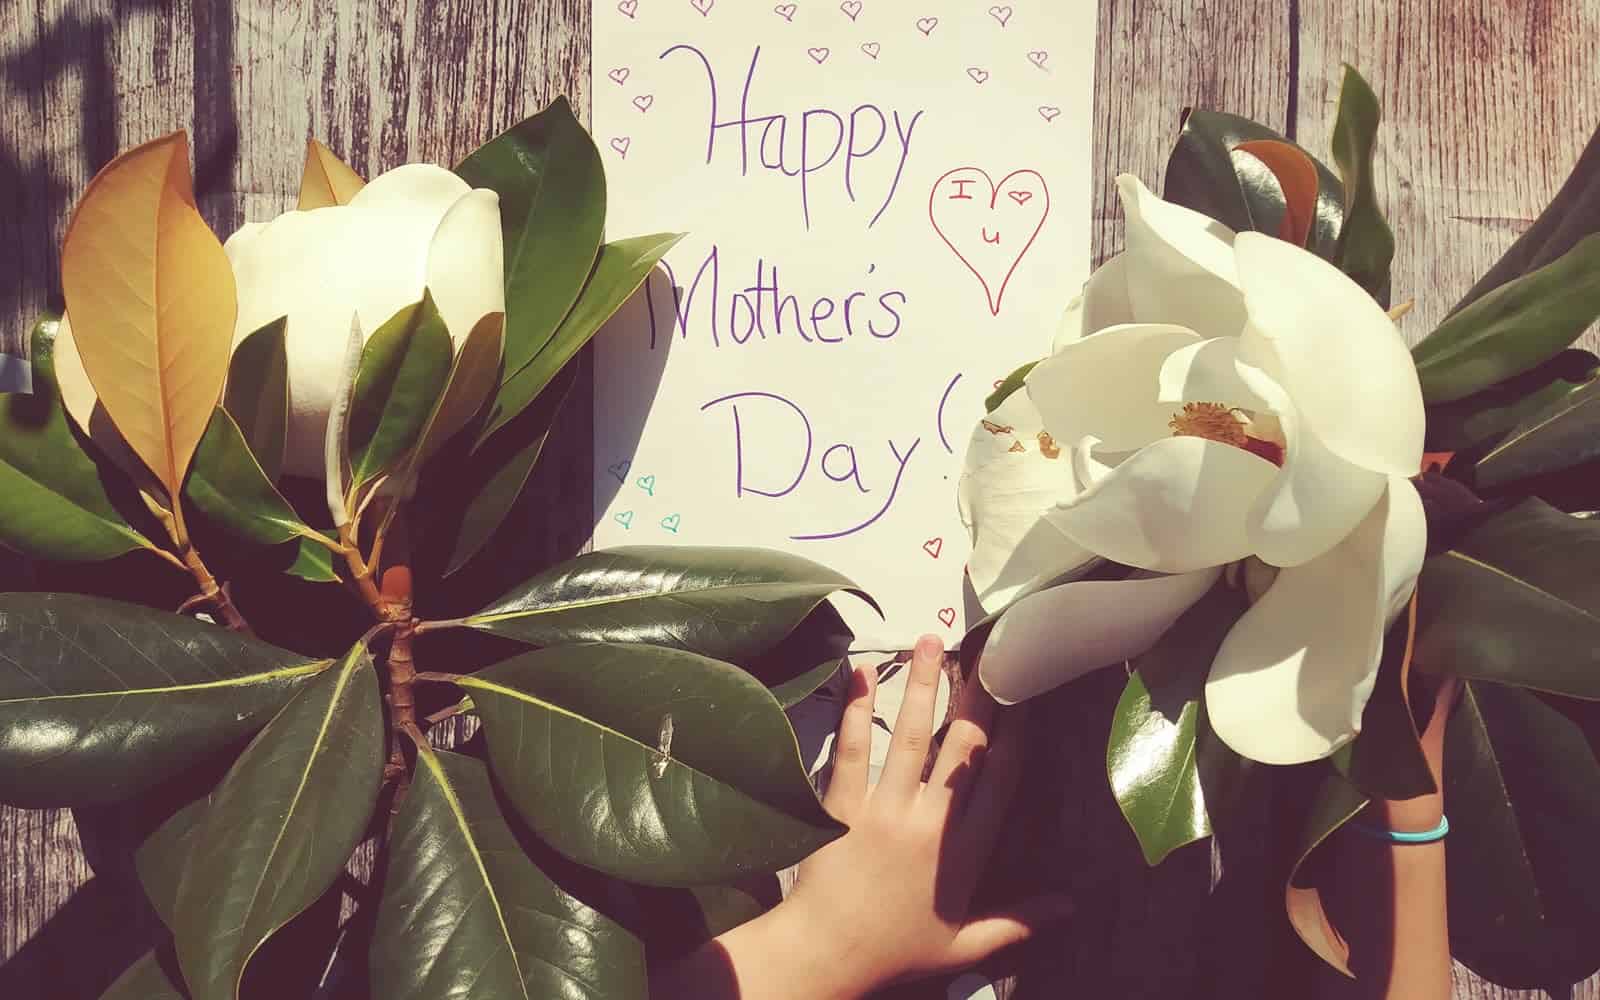 5 Simple Ways to Show Her You Care on Mother’s Day